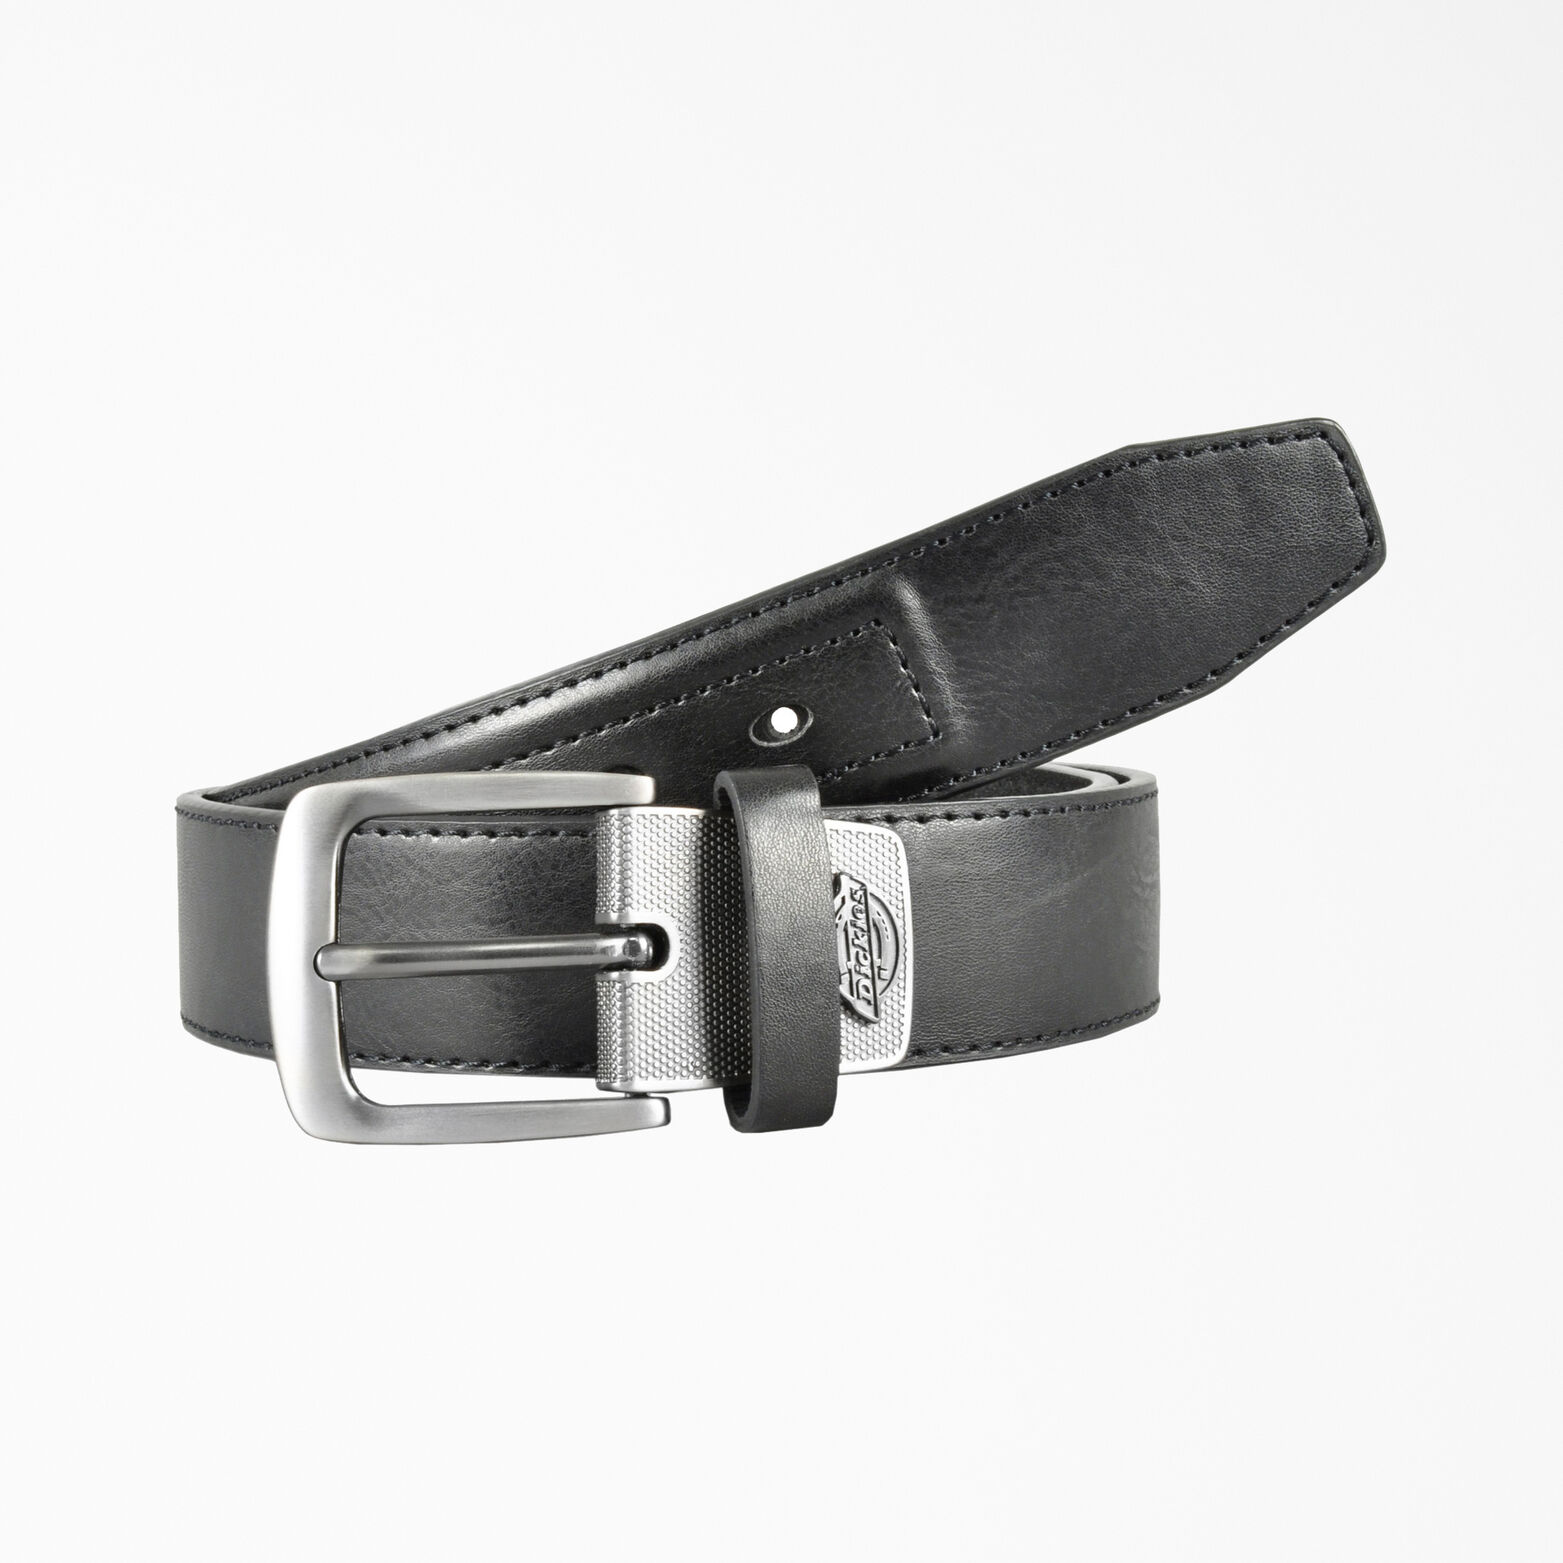 Leather Industrial Strength Belt Accessories Belts |